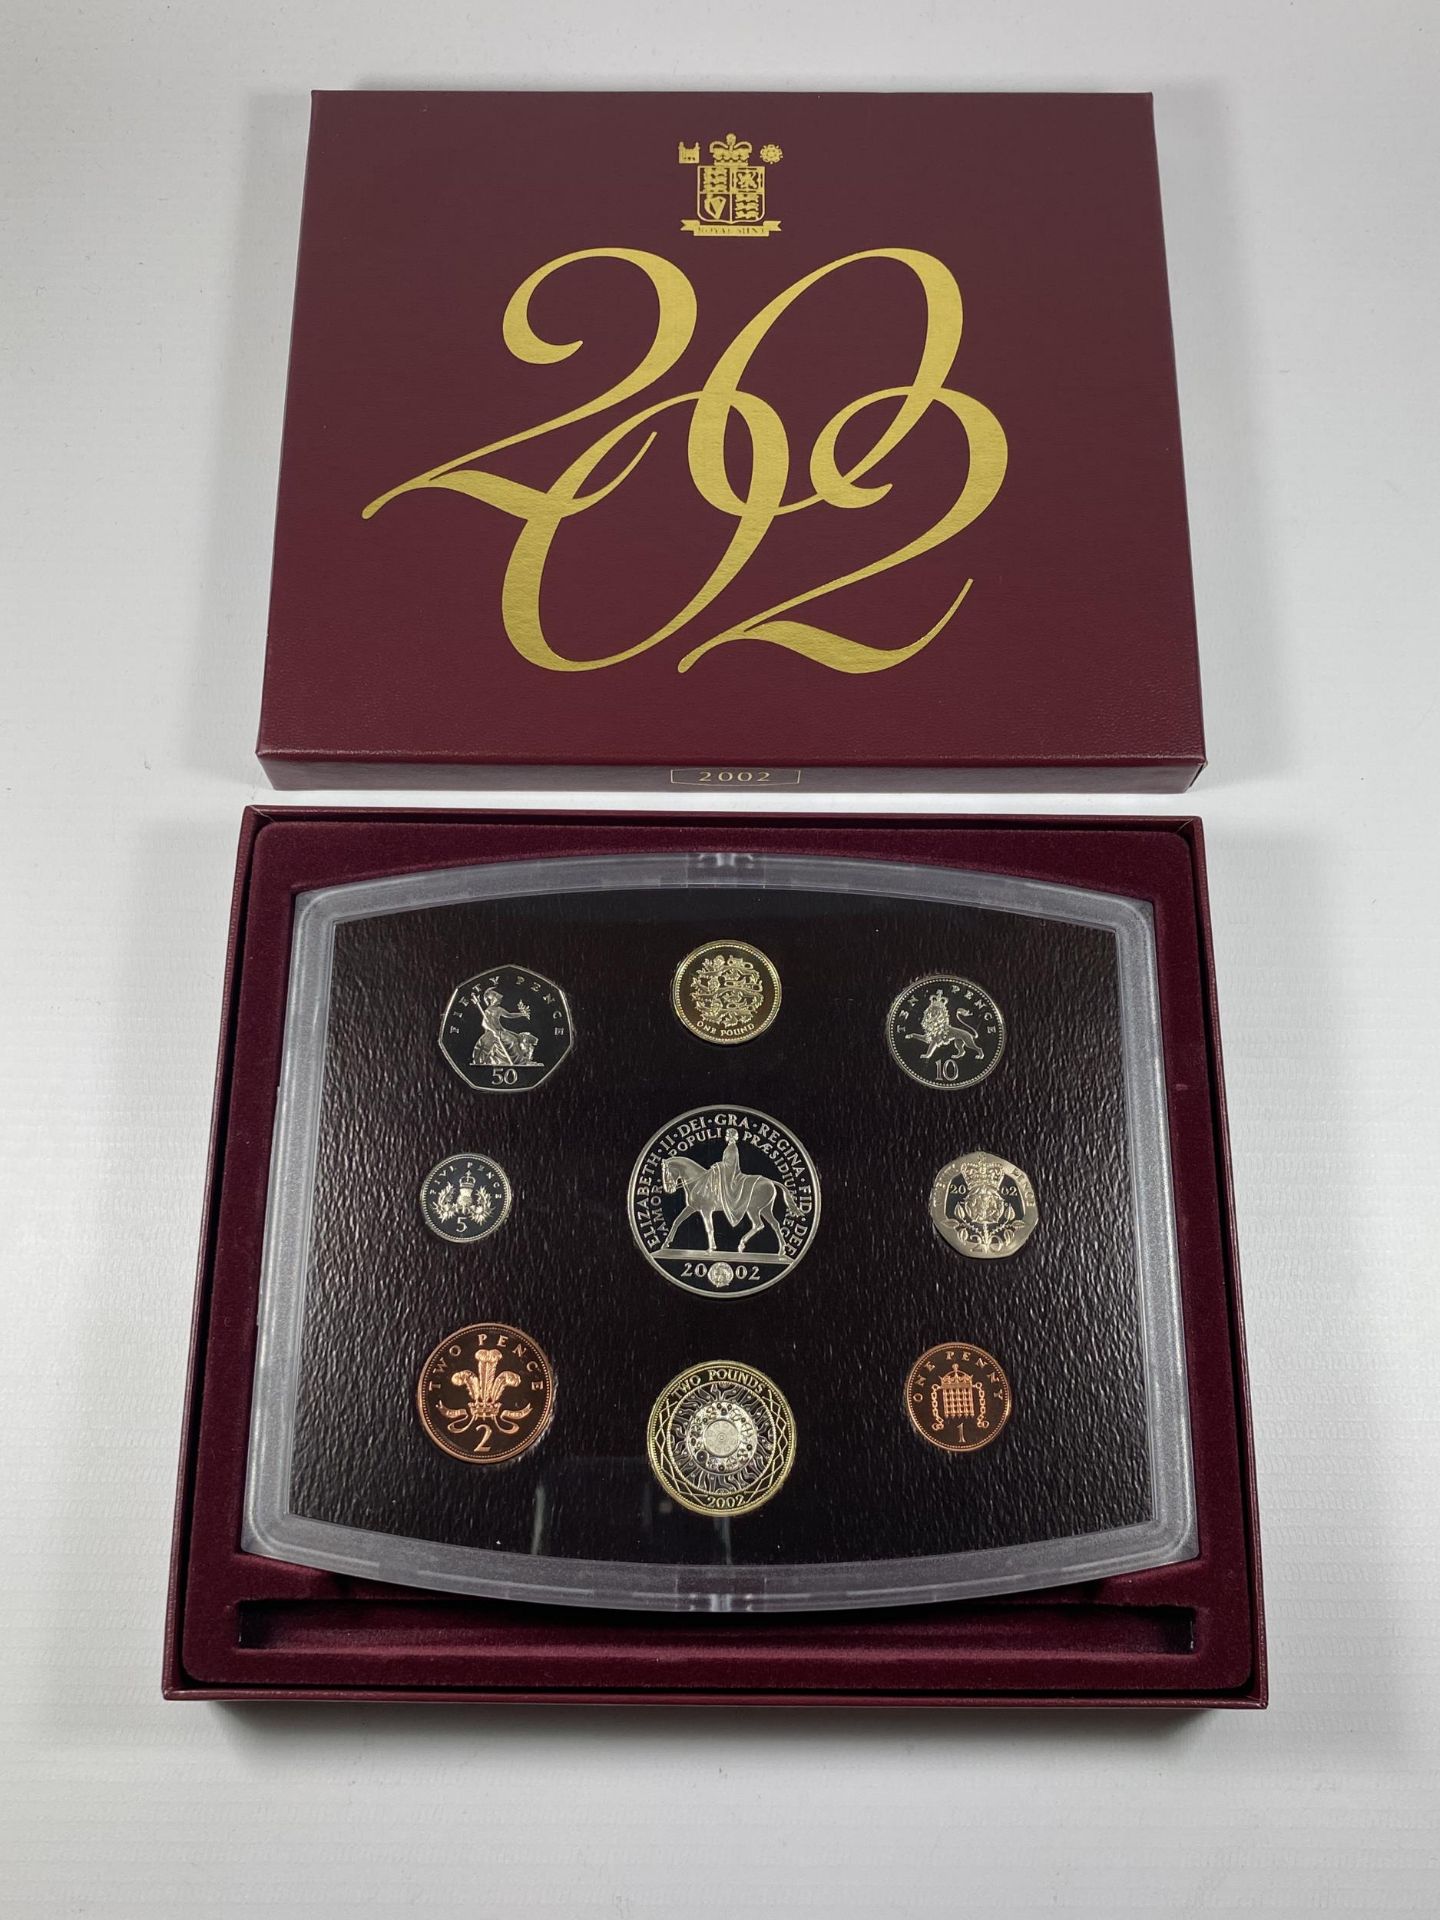 A 2002 ROYAL MINT CASED PROOF COIN SET